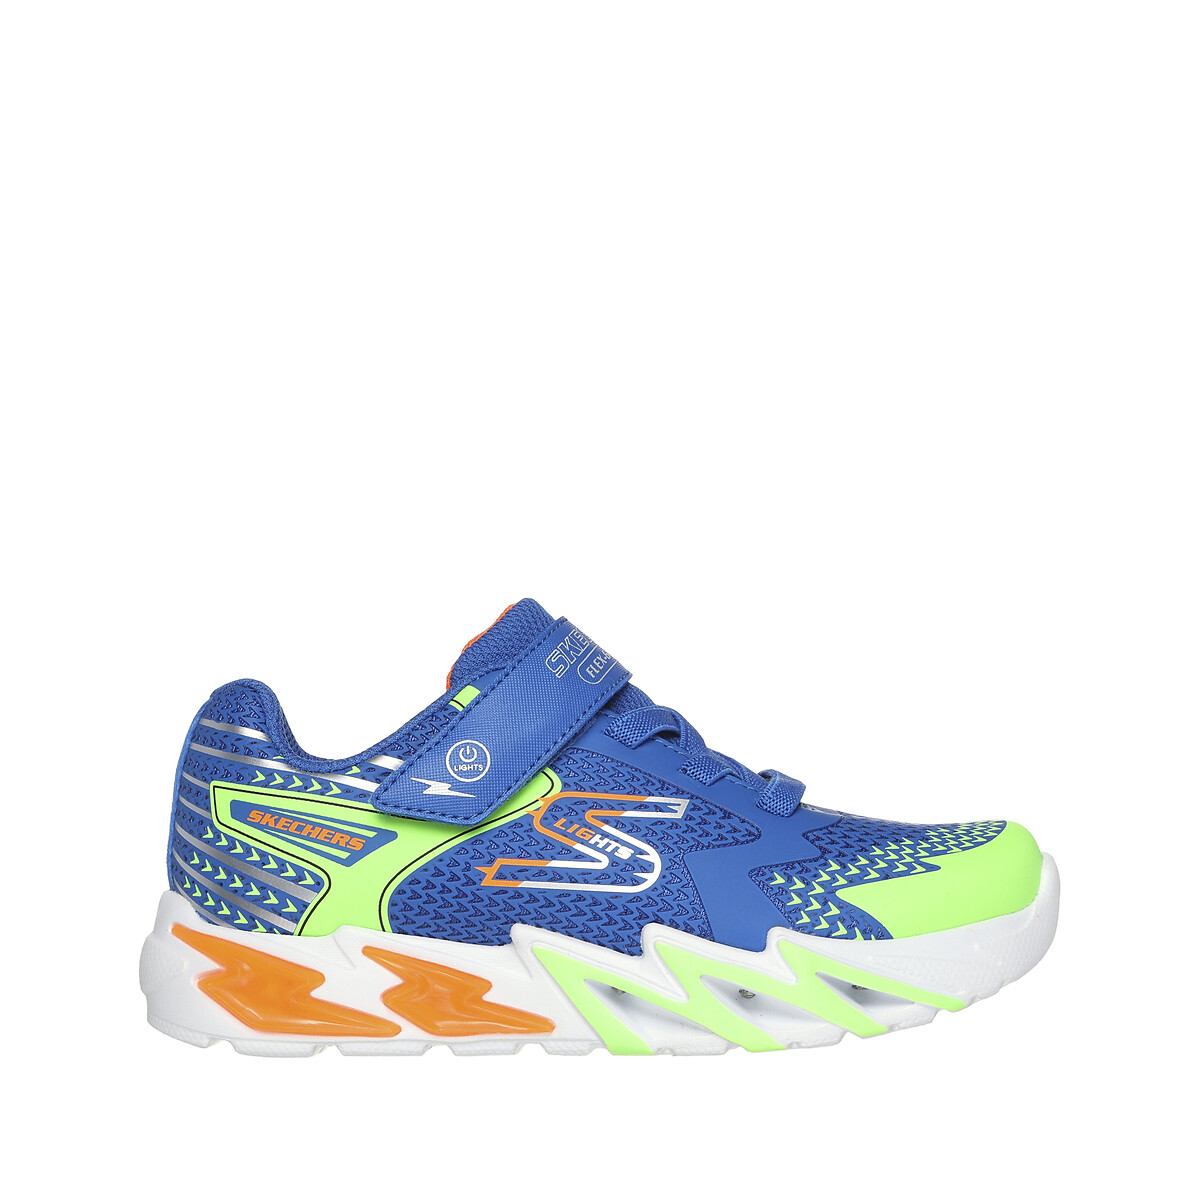 Kids Flex-Glow Bolt Trainers with Touch ’n’ Close Fastening